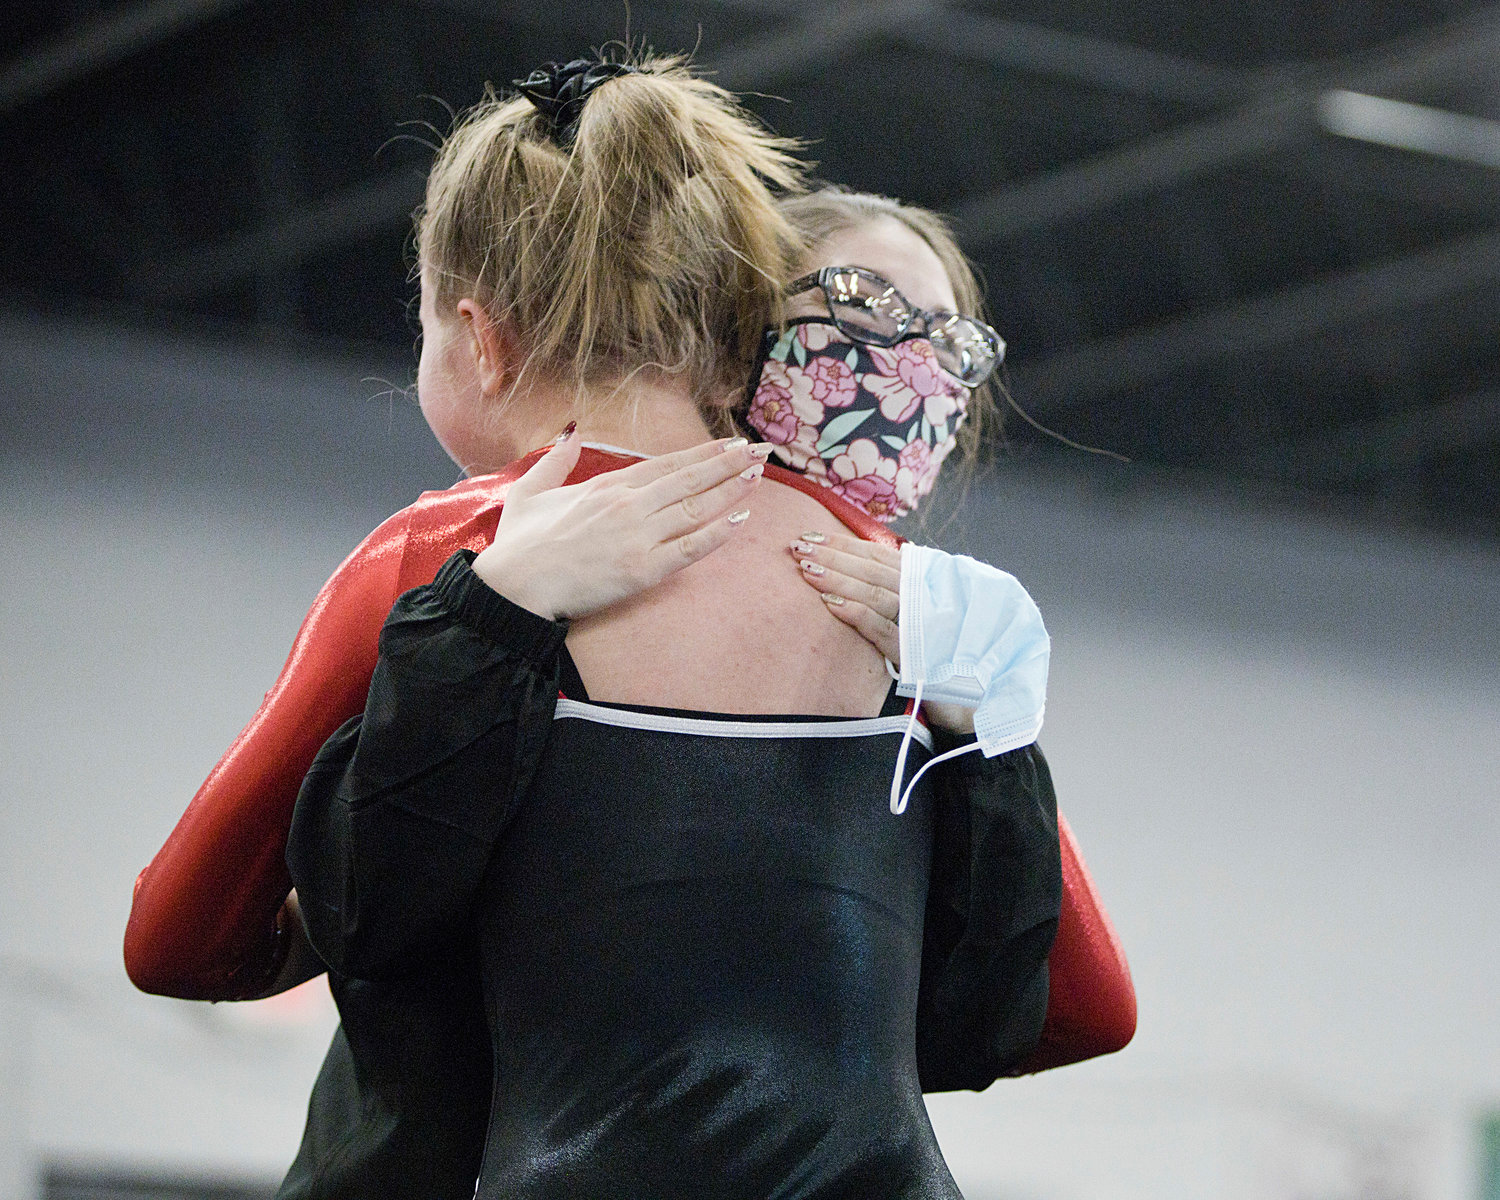 Assistant coach Vickie Lombardi congratulates Brettyn-Olivia Newsome on her floor routine.